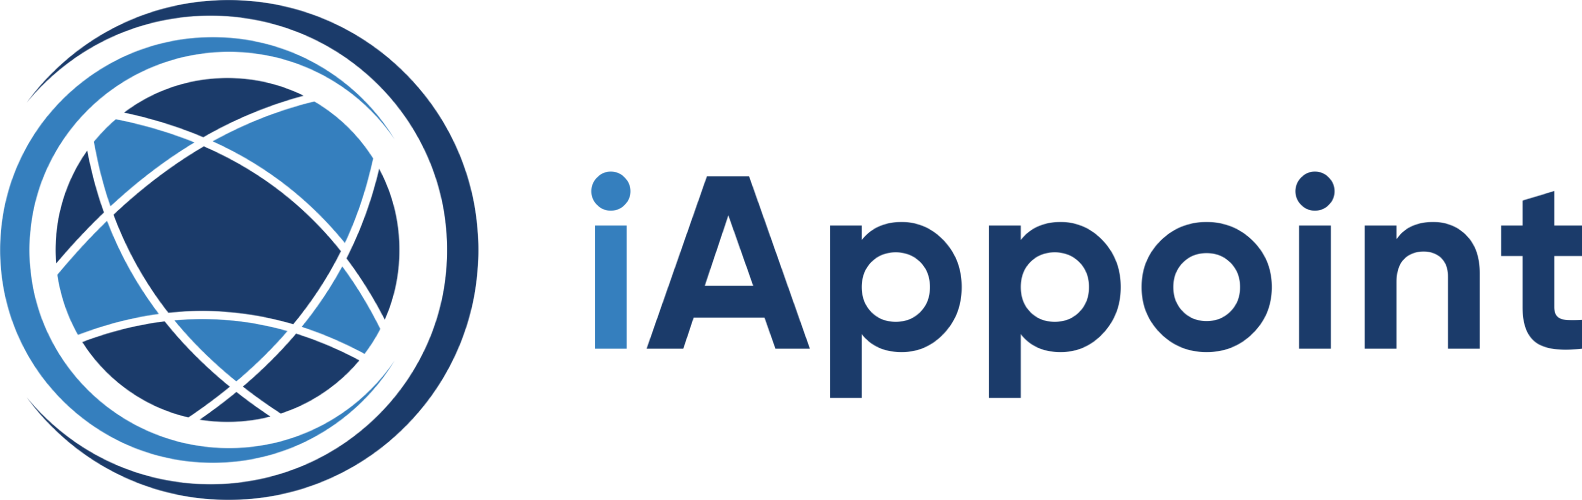 iAppoint-transparent (1)